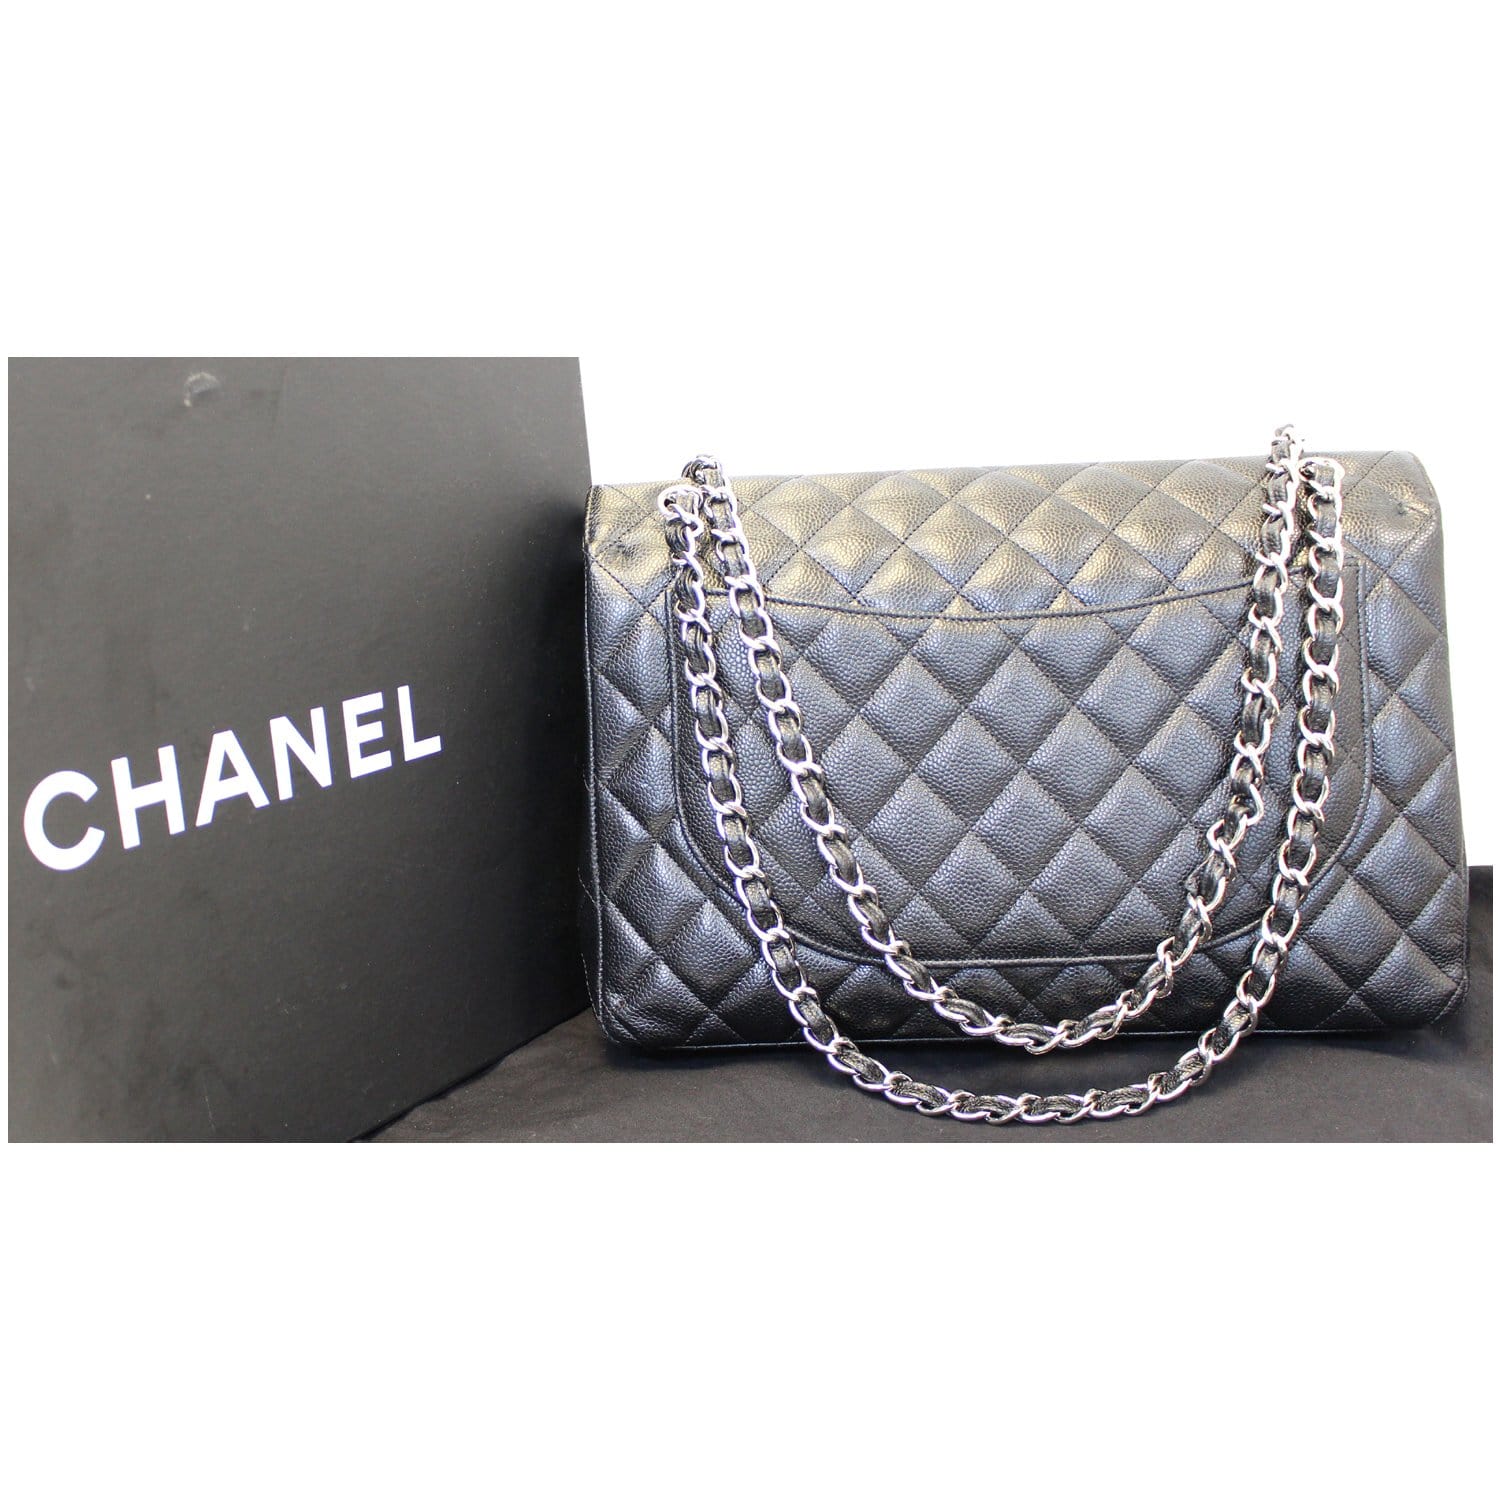 How You Can Properly Clean Your Chanel Bags - Couture USA